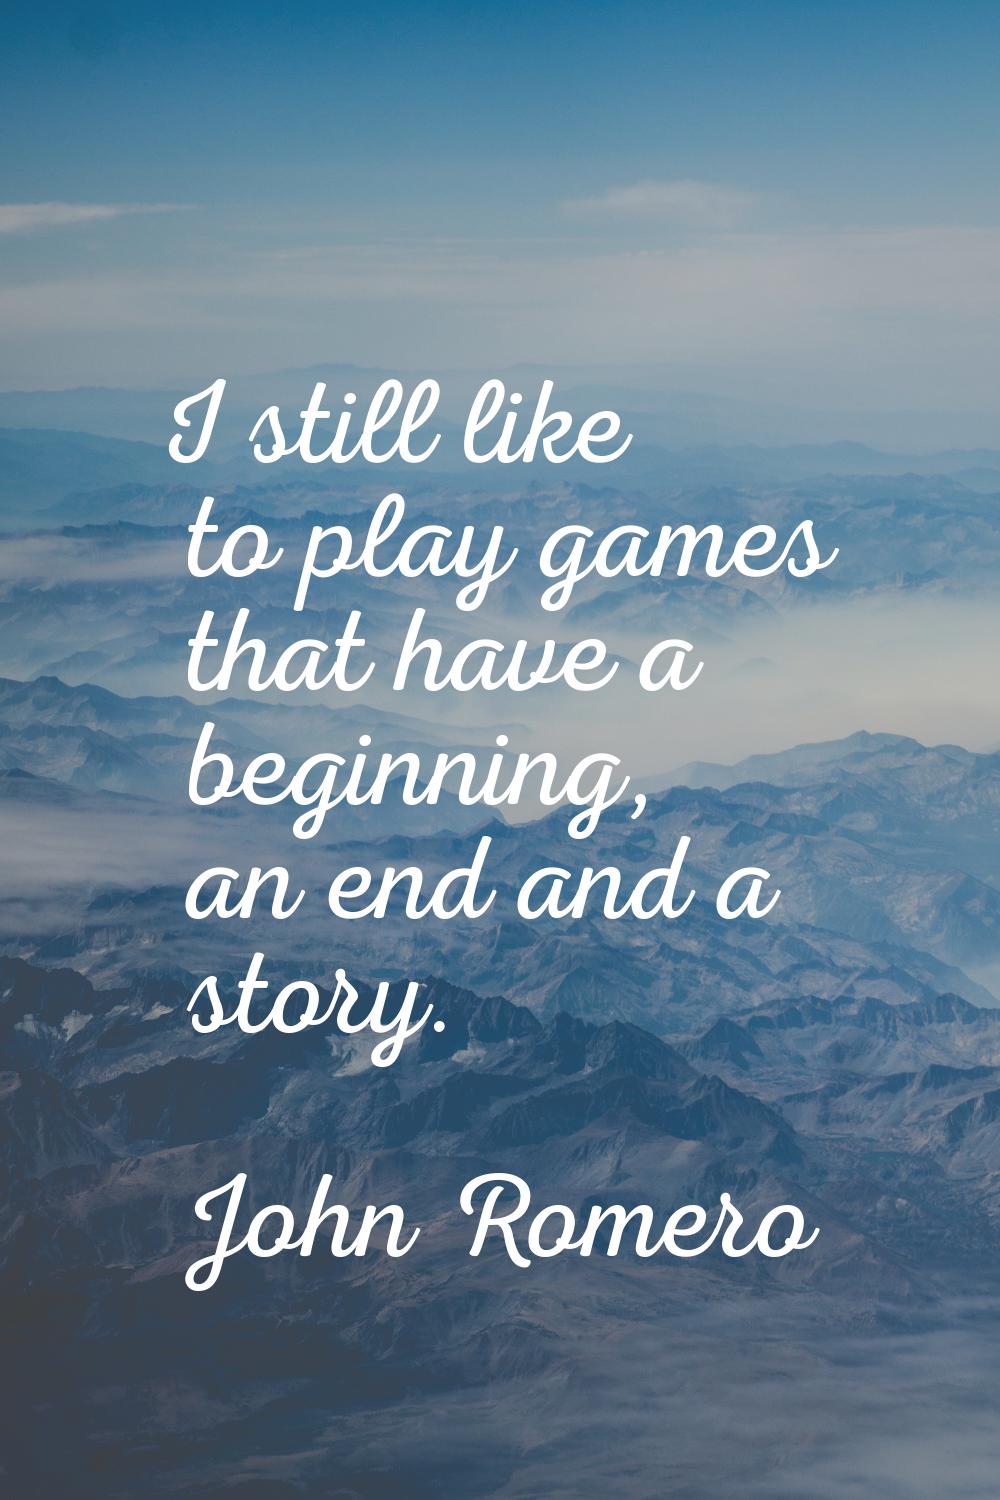 I still like to play games that have a beginning, an end and a story.